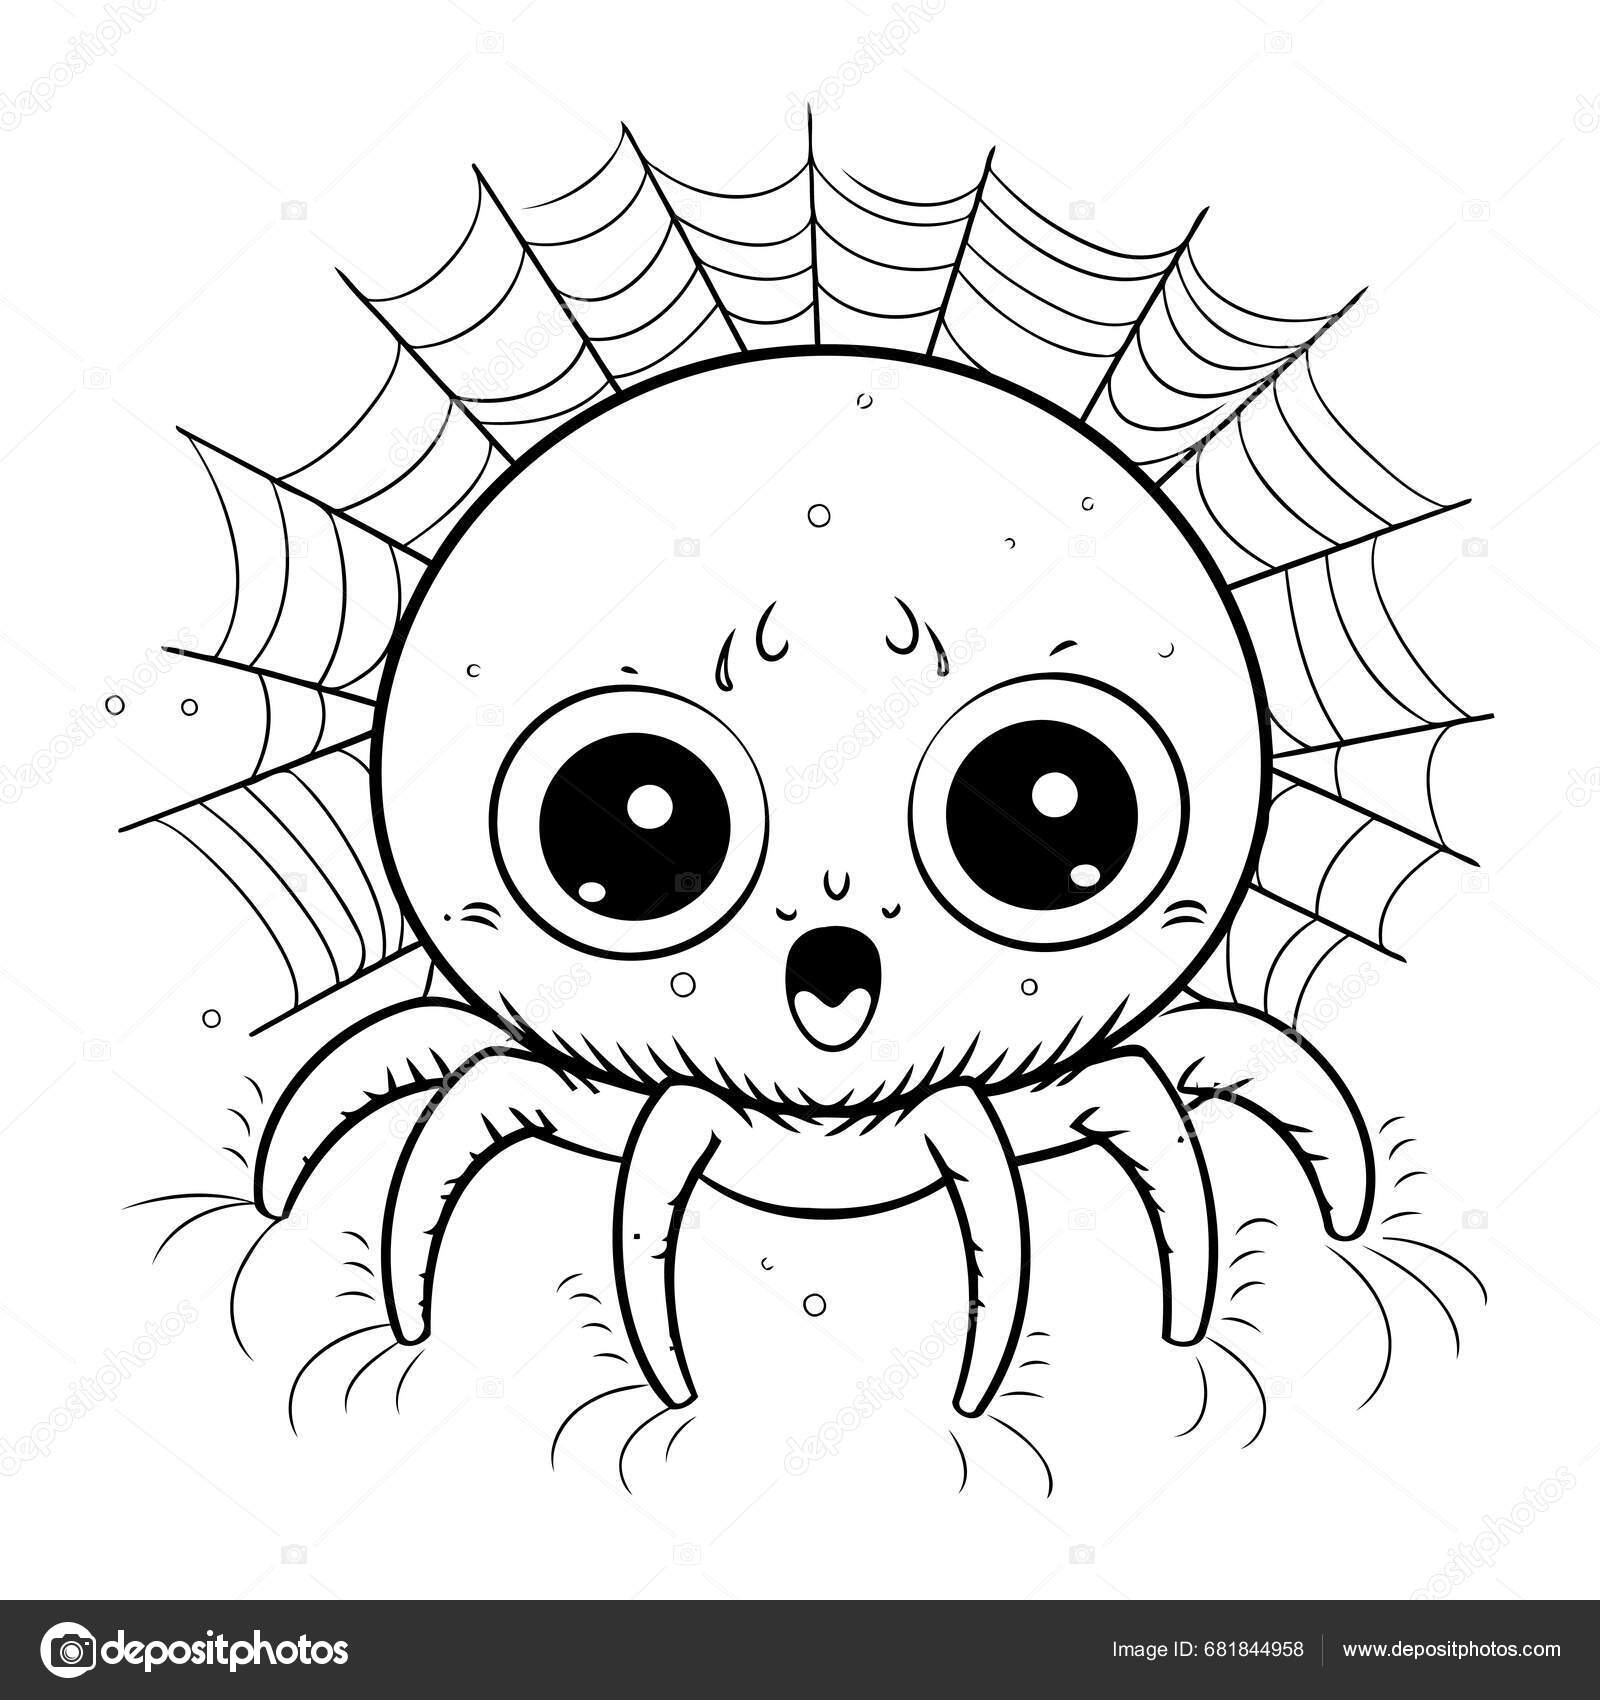 Cute spider coloring page kids black white vector illustration stock vector by ibrandify